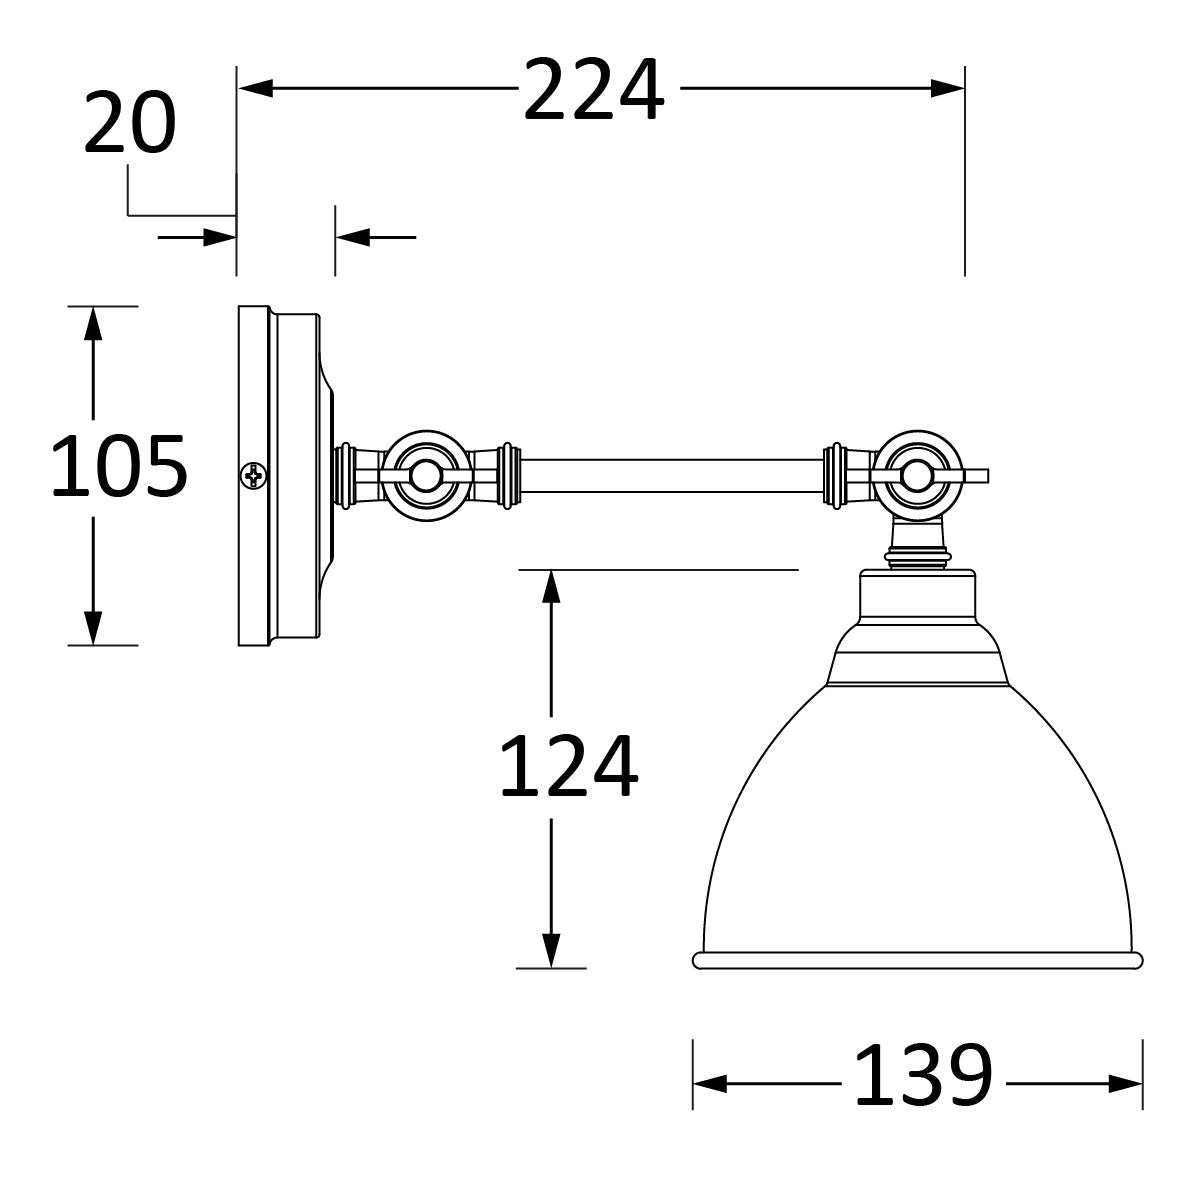 SHOW Technical Drawing of Brindley Wall Light in Flock